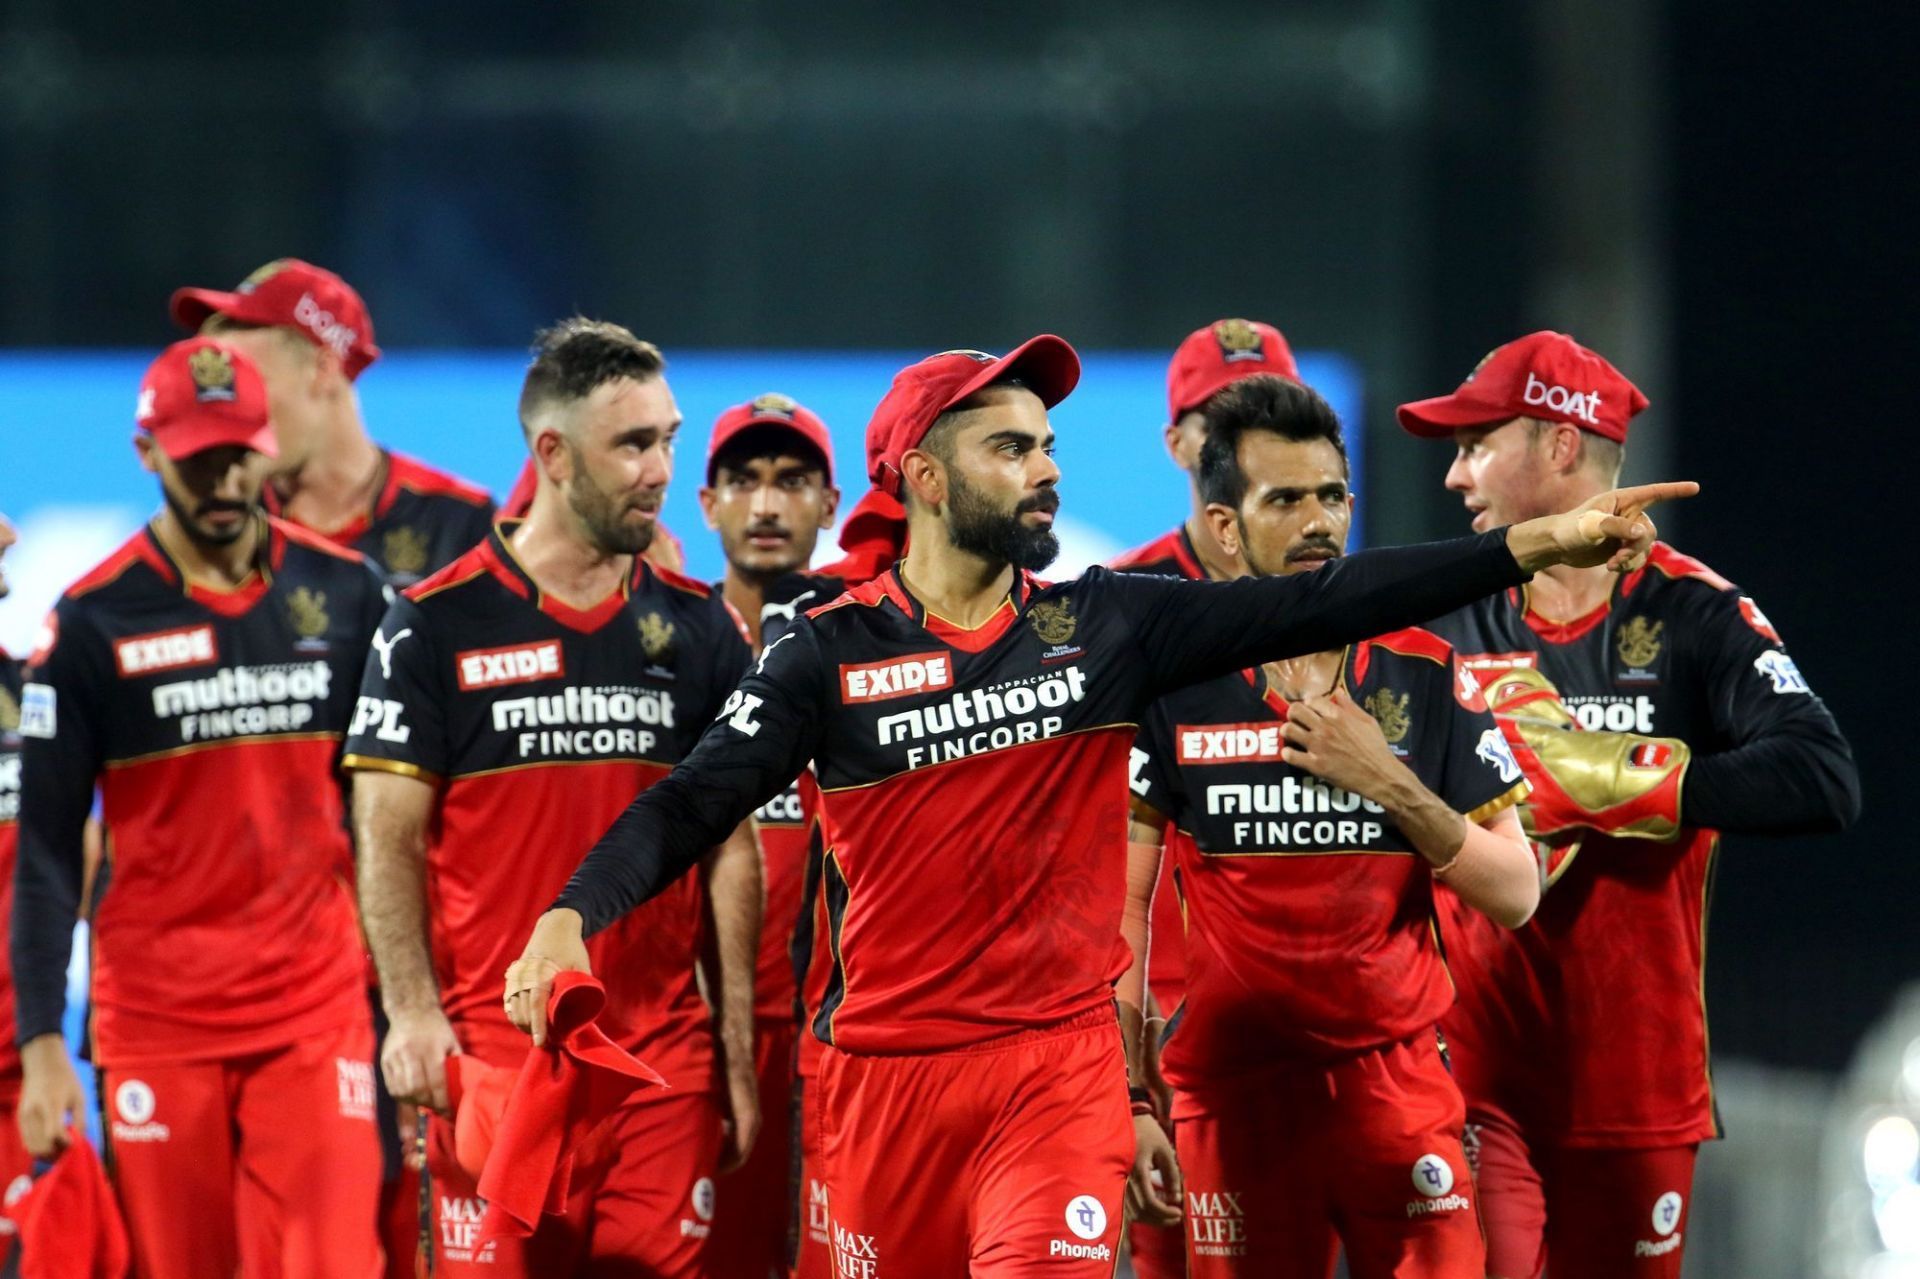 RCB are also in the hunt for a new captain